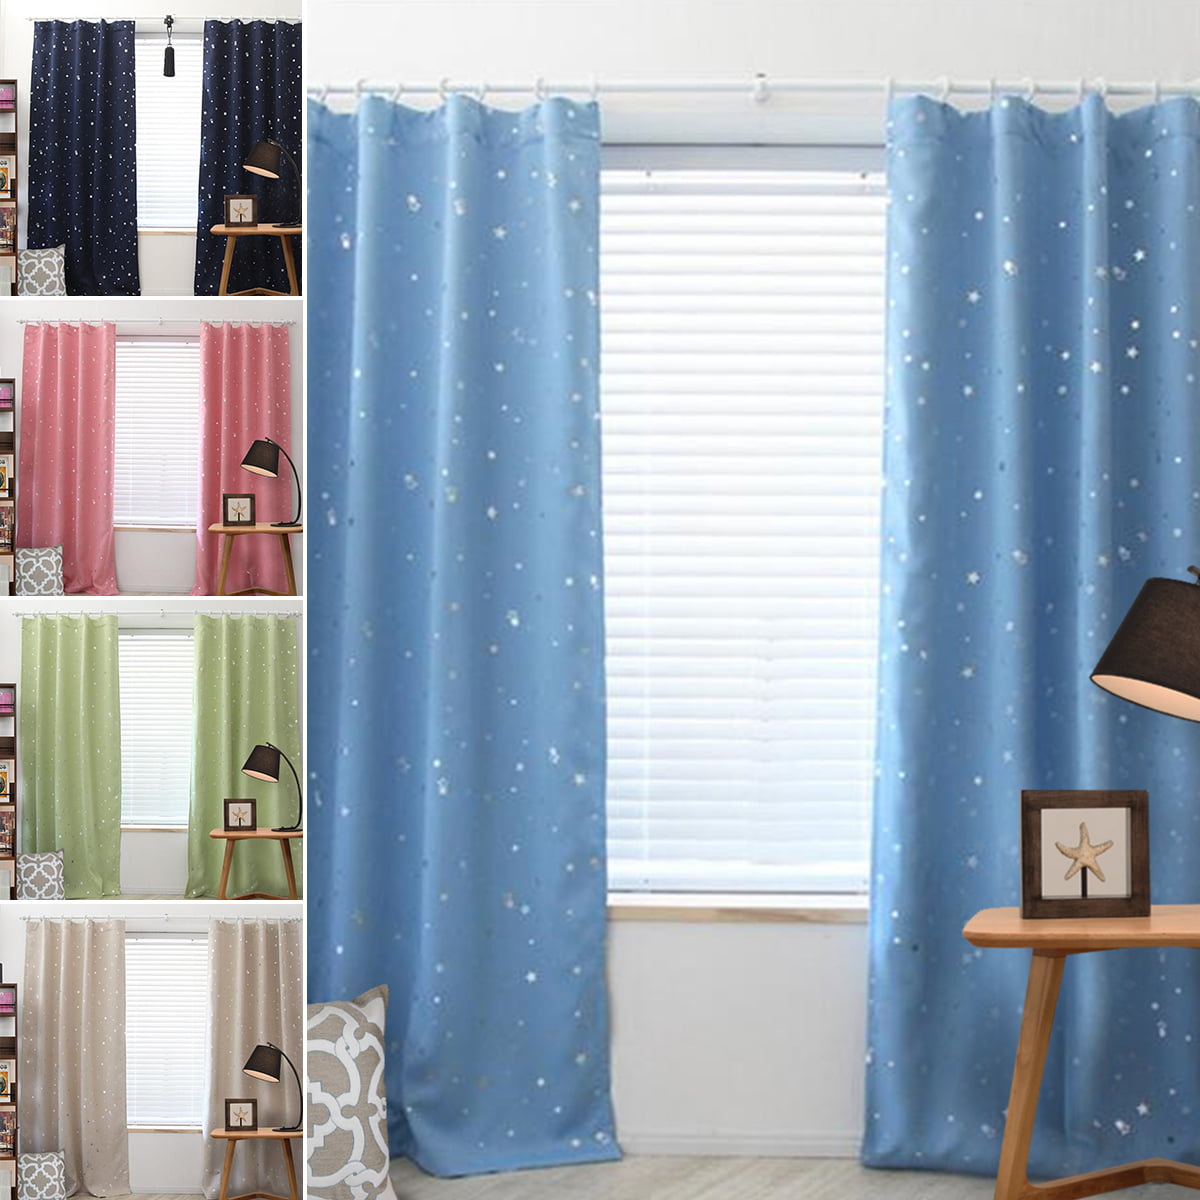 Stars Kids Thermal Blackout Ready Made Eyelet Curtains Dimout Energy Saving 